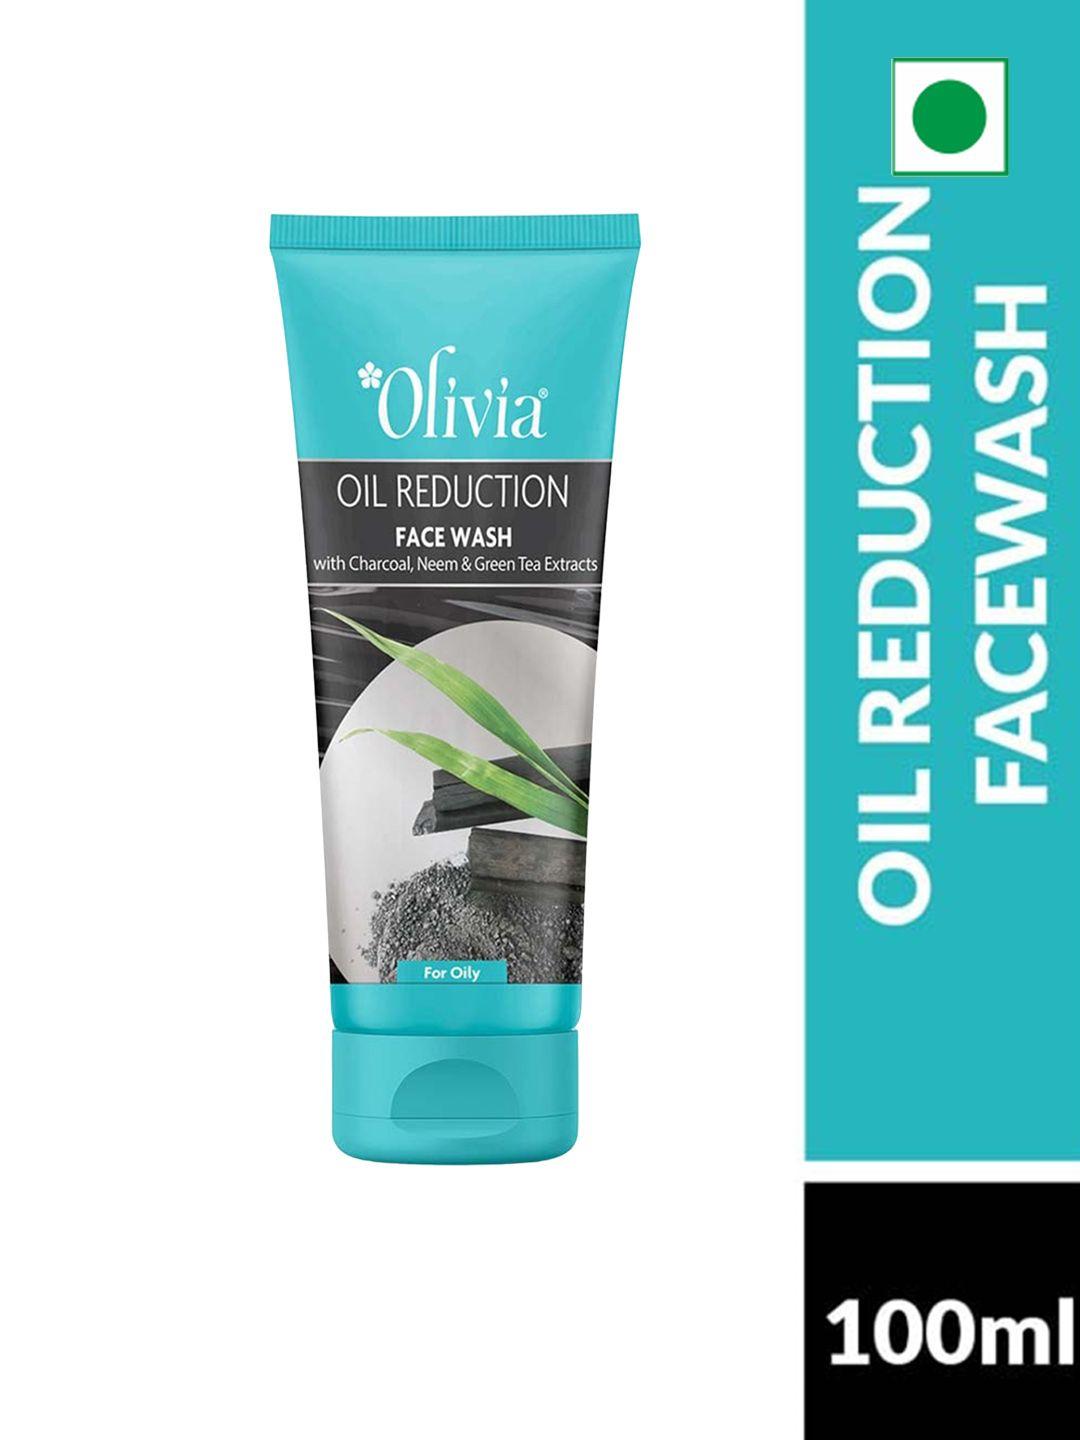 olivia oil reduction face wash with charcoal neem & green tea extracts - 100ml